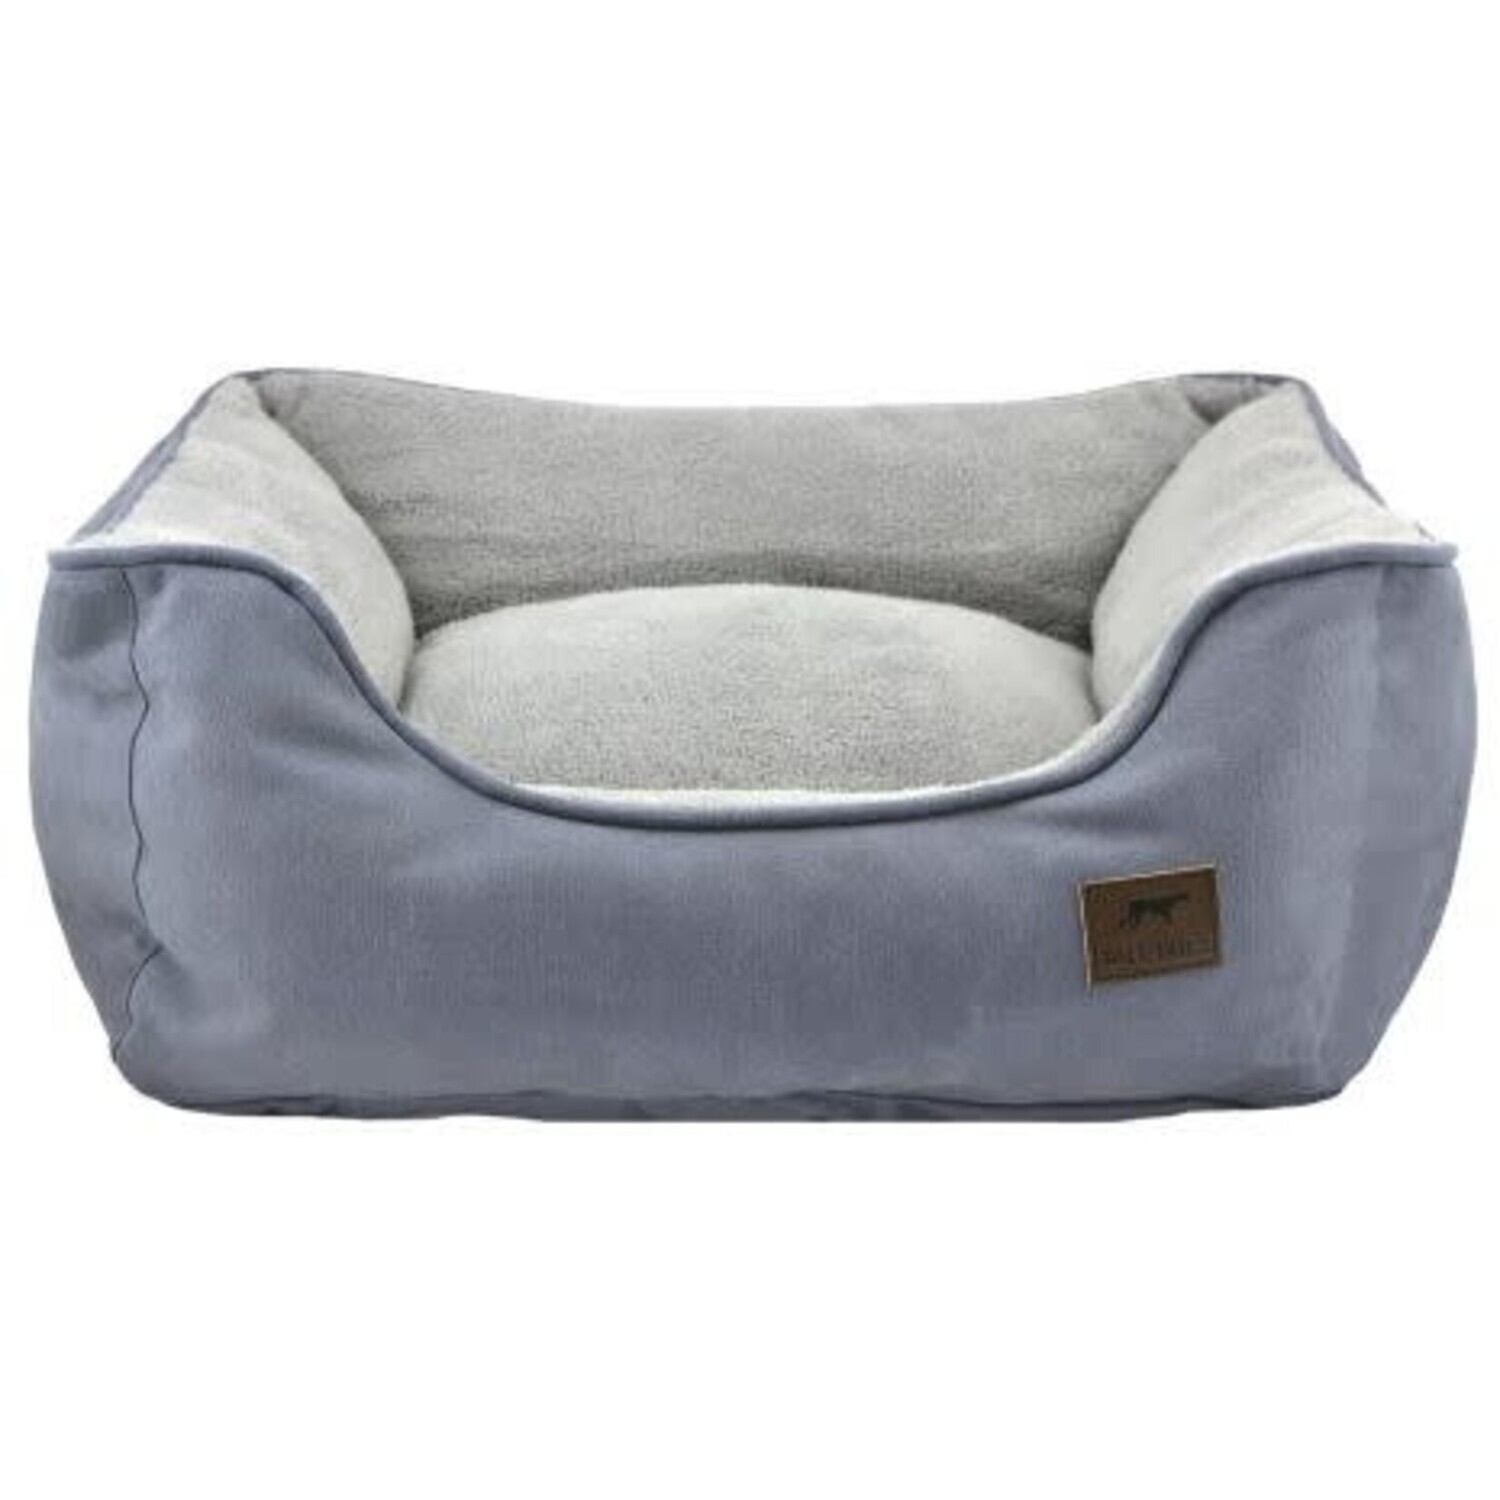 TALL TAILS DOG BOLSTER BED